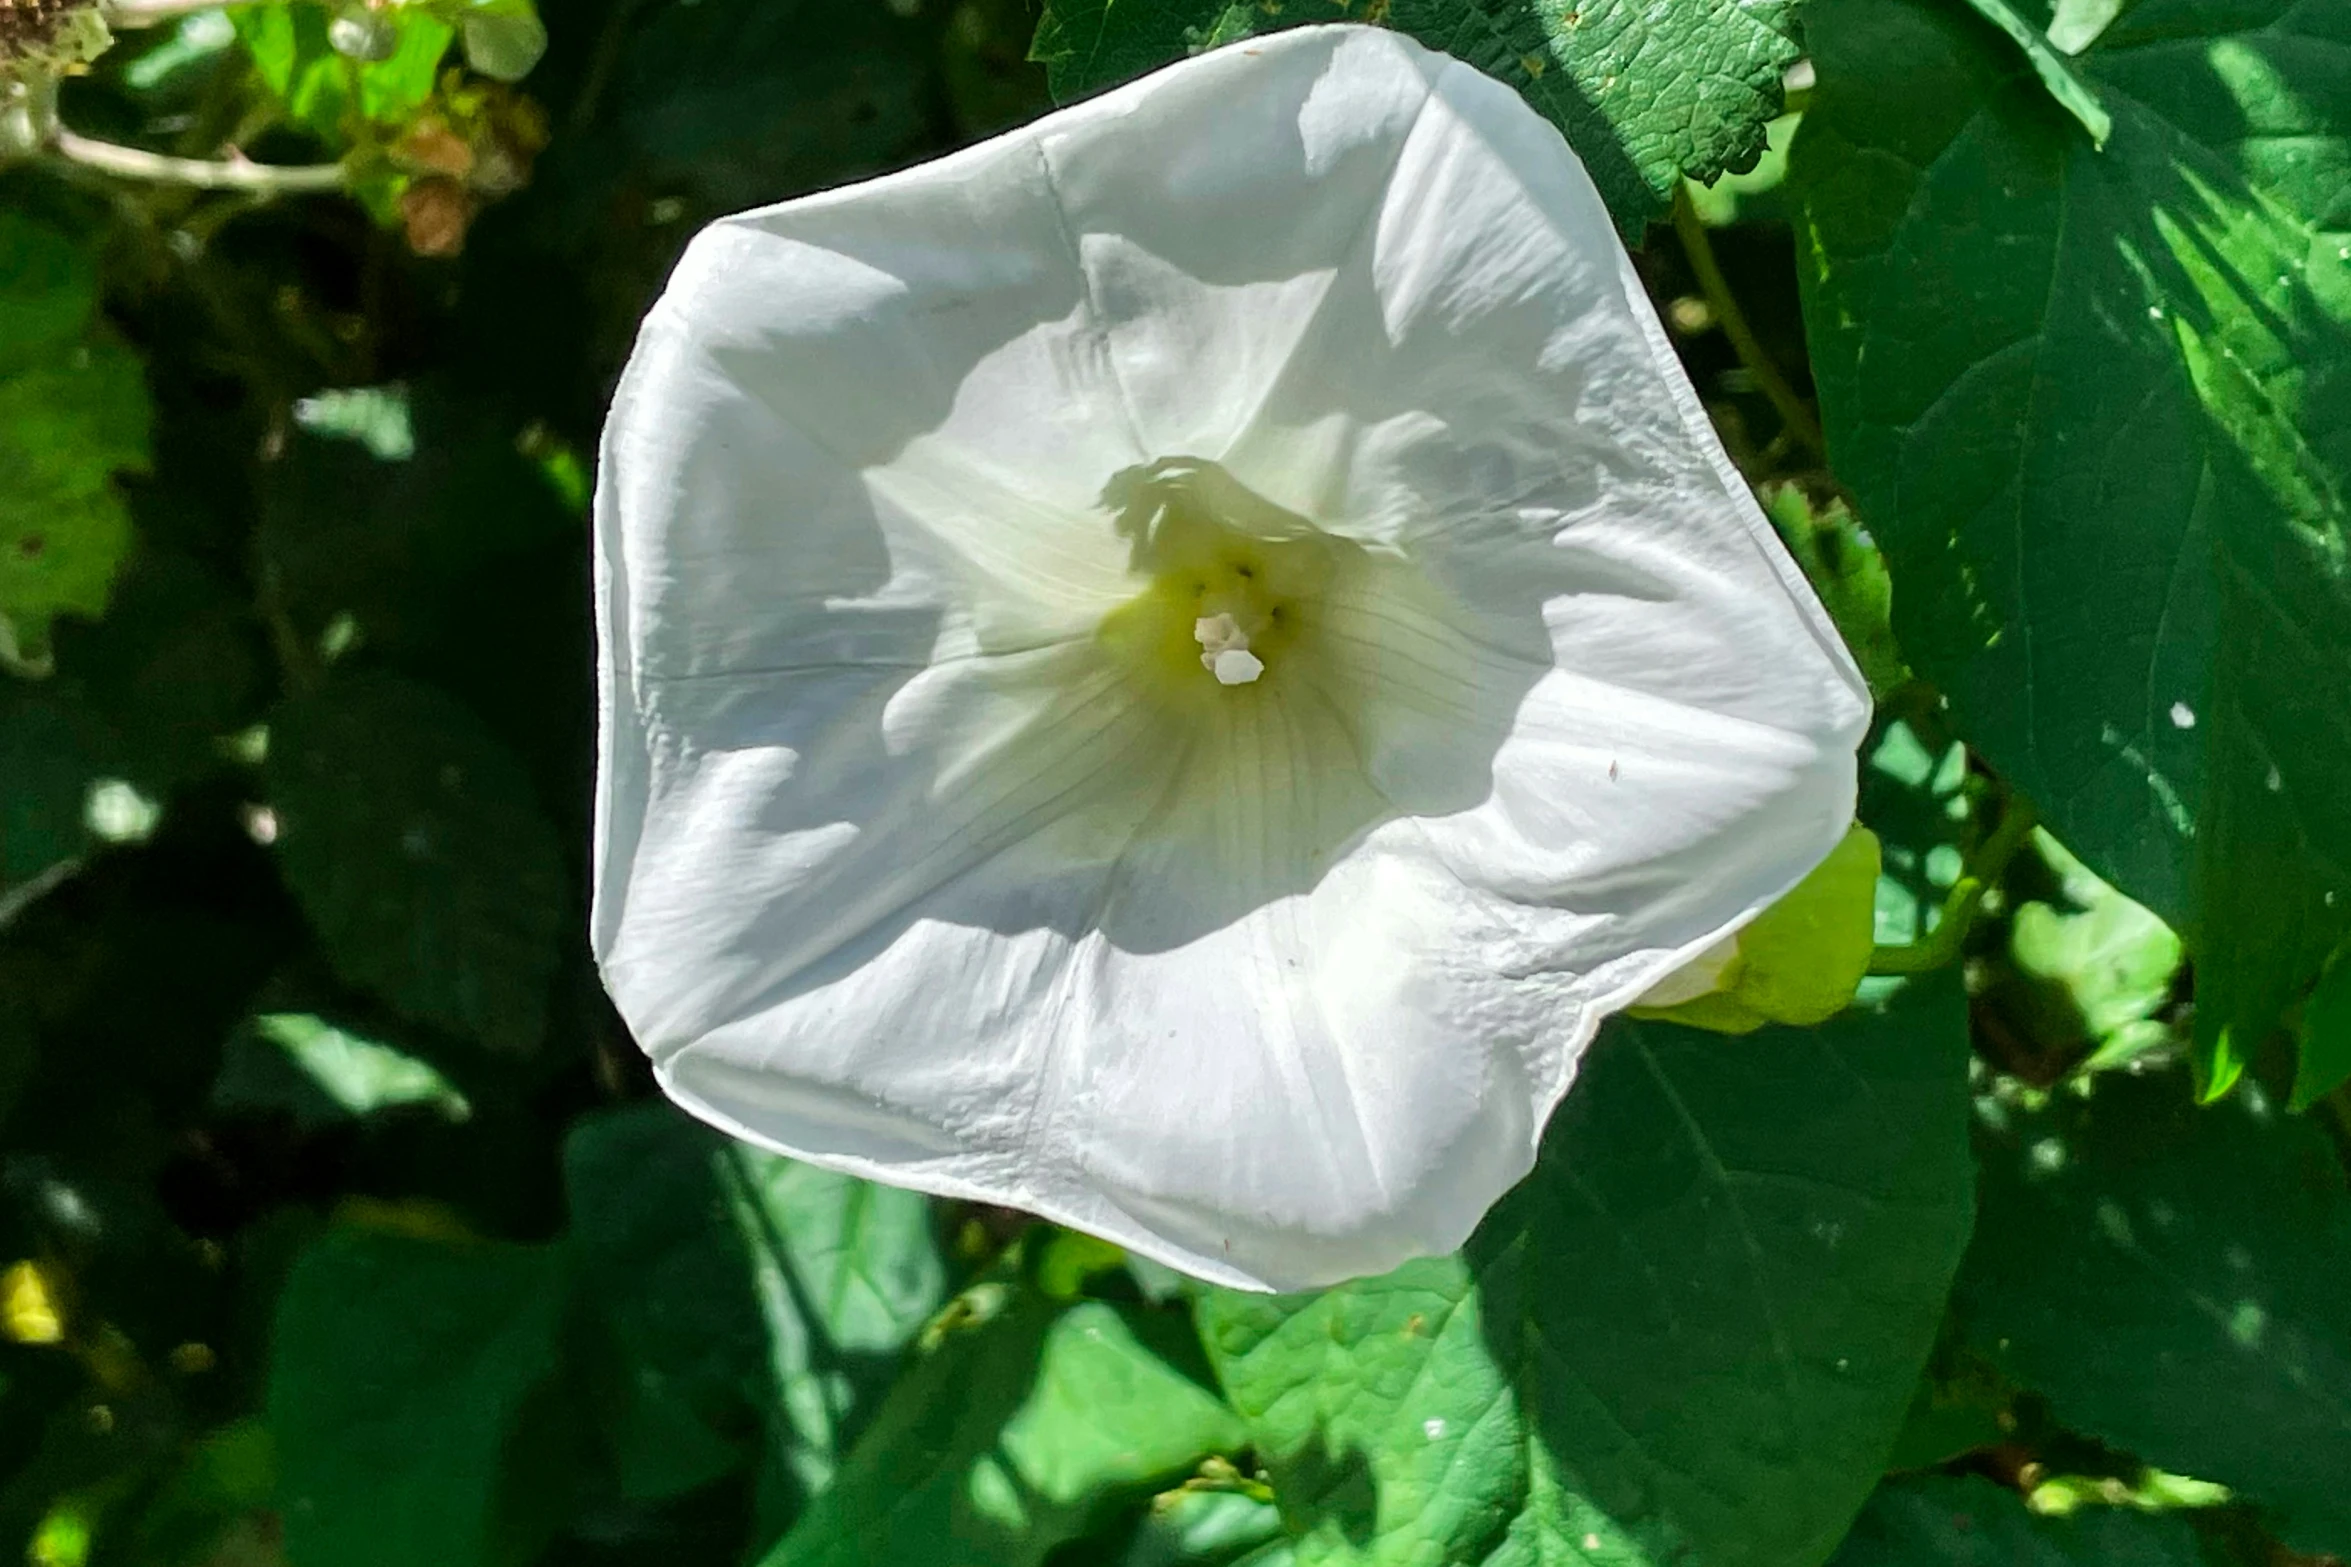 a white flower in the center of the plant